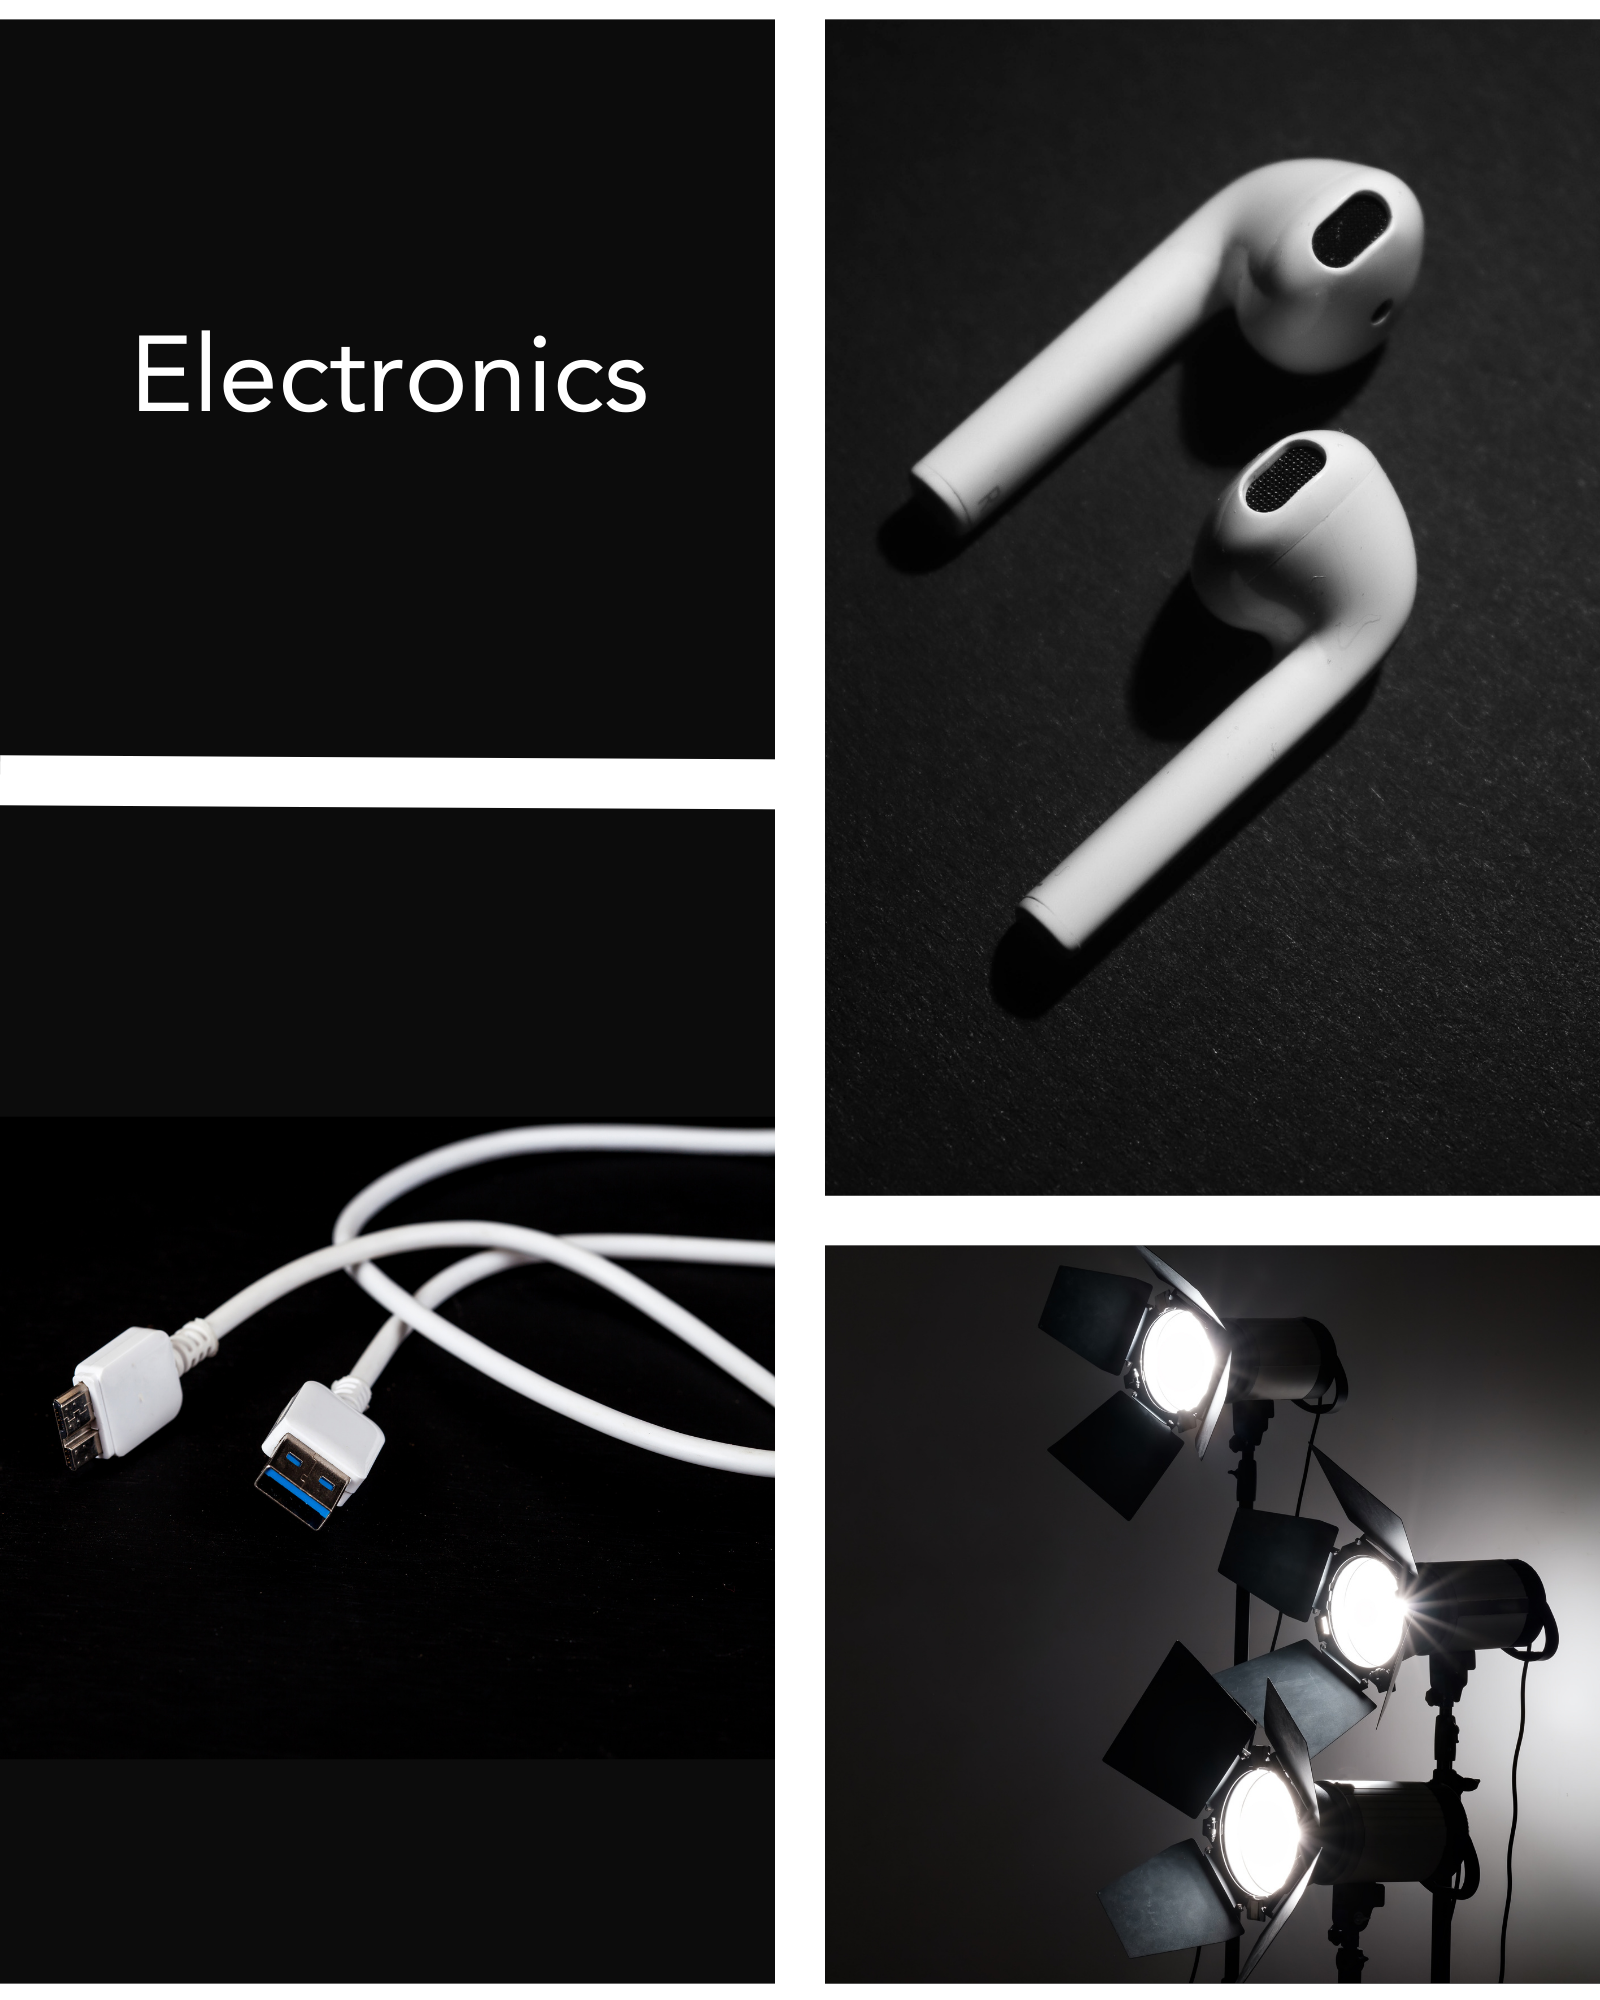 A collage representing a variety of electronic Items like a usb charger cable in the bottom left corner, a pair of earphone in the top right corner and in the bottom right corner there is a image of industrial grade studio lights